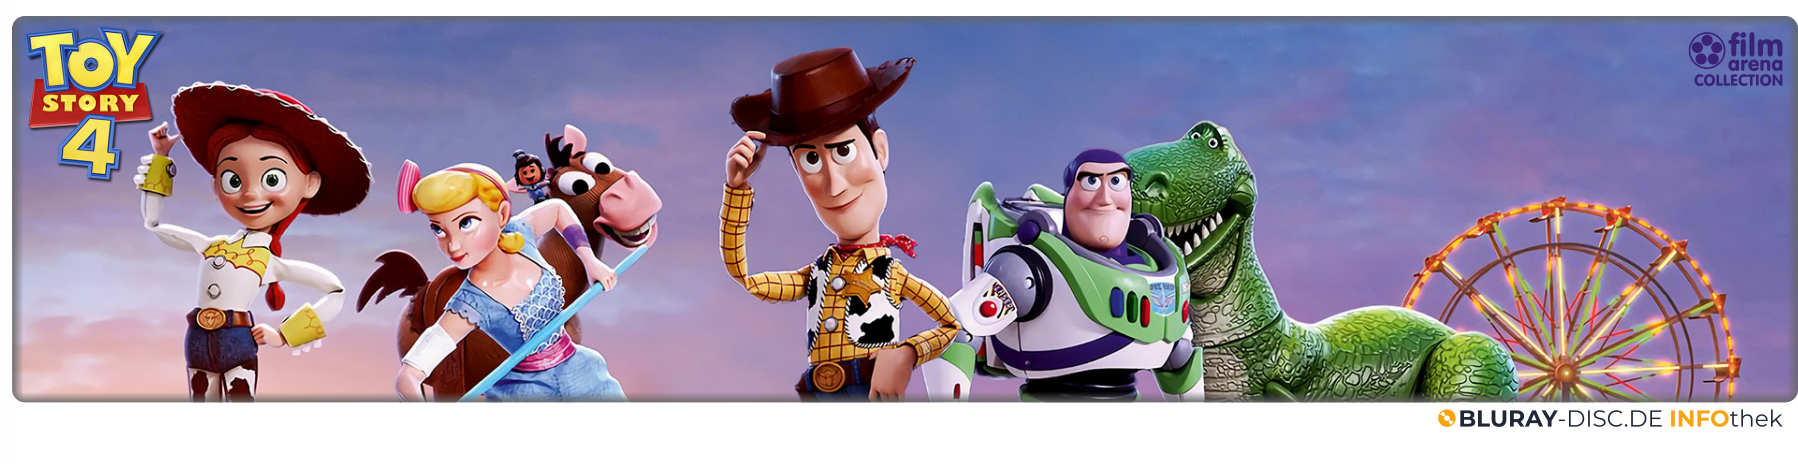 Toy_Story_4.png